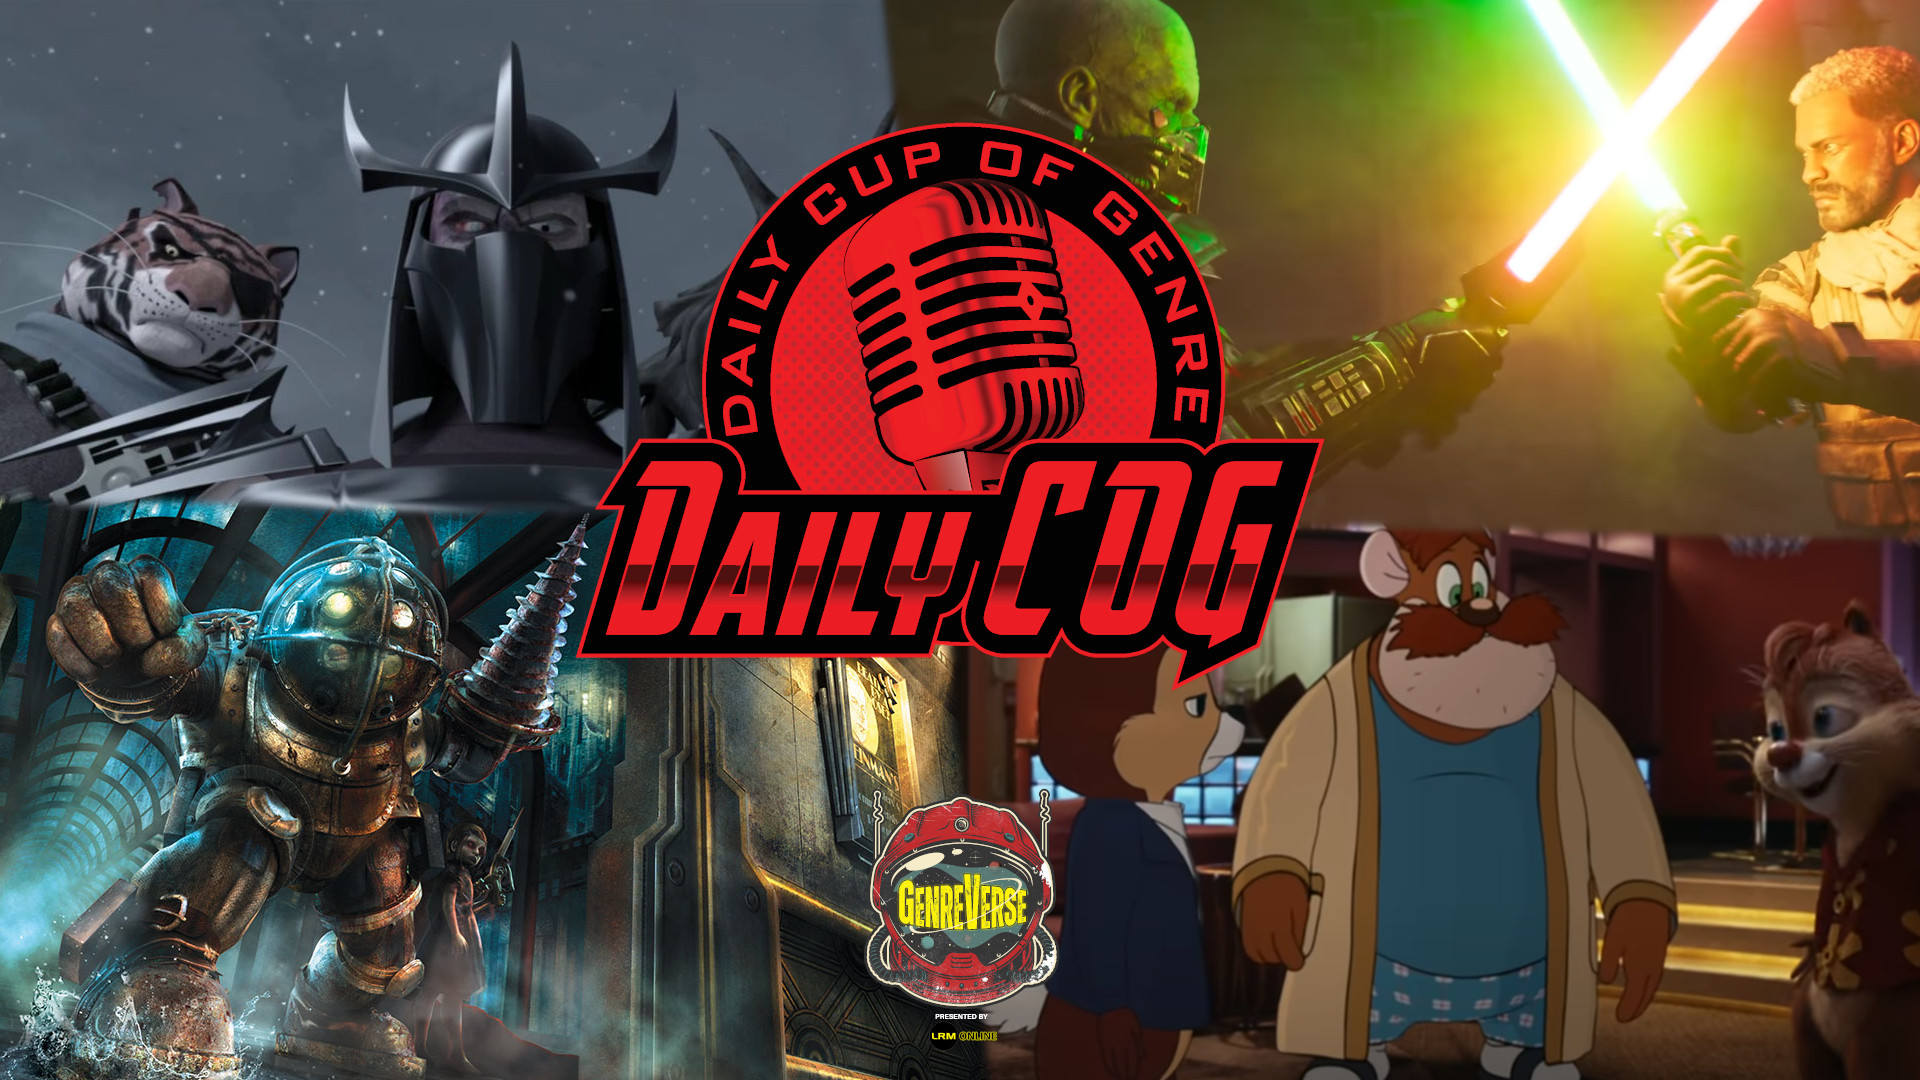 Rescue Rangers Trailer & The Old Republic Cinematic Reaction, TMNT Villains Spinoffs, And A Netflix BioShock Movie | Daily COG